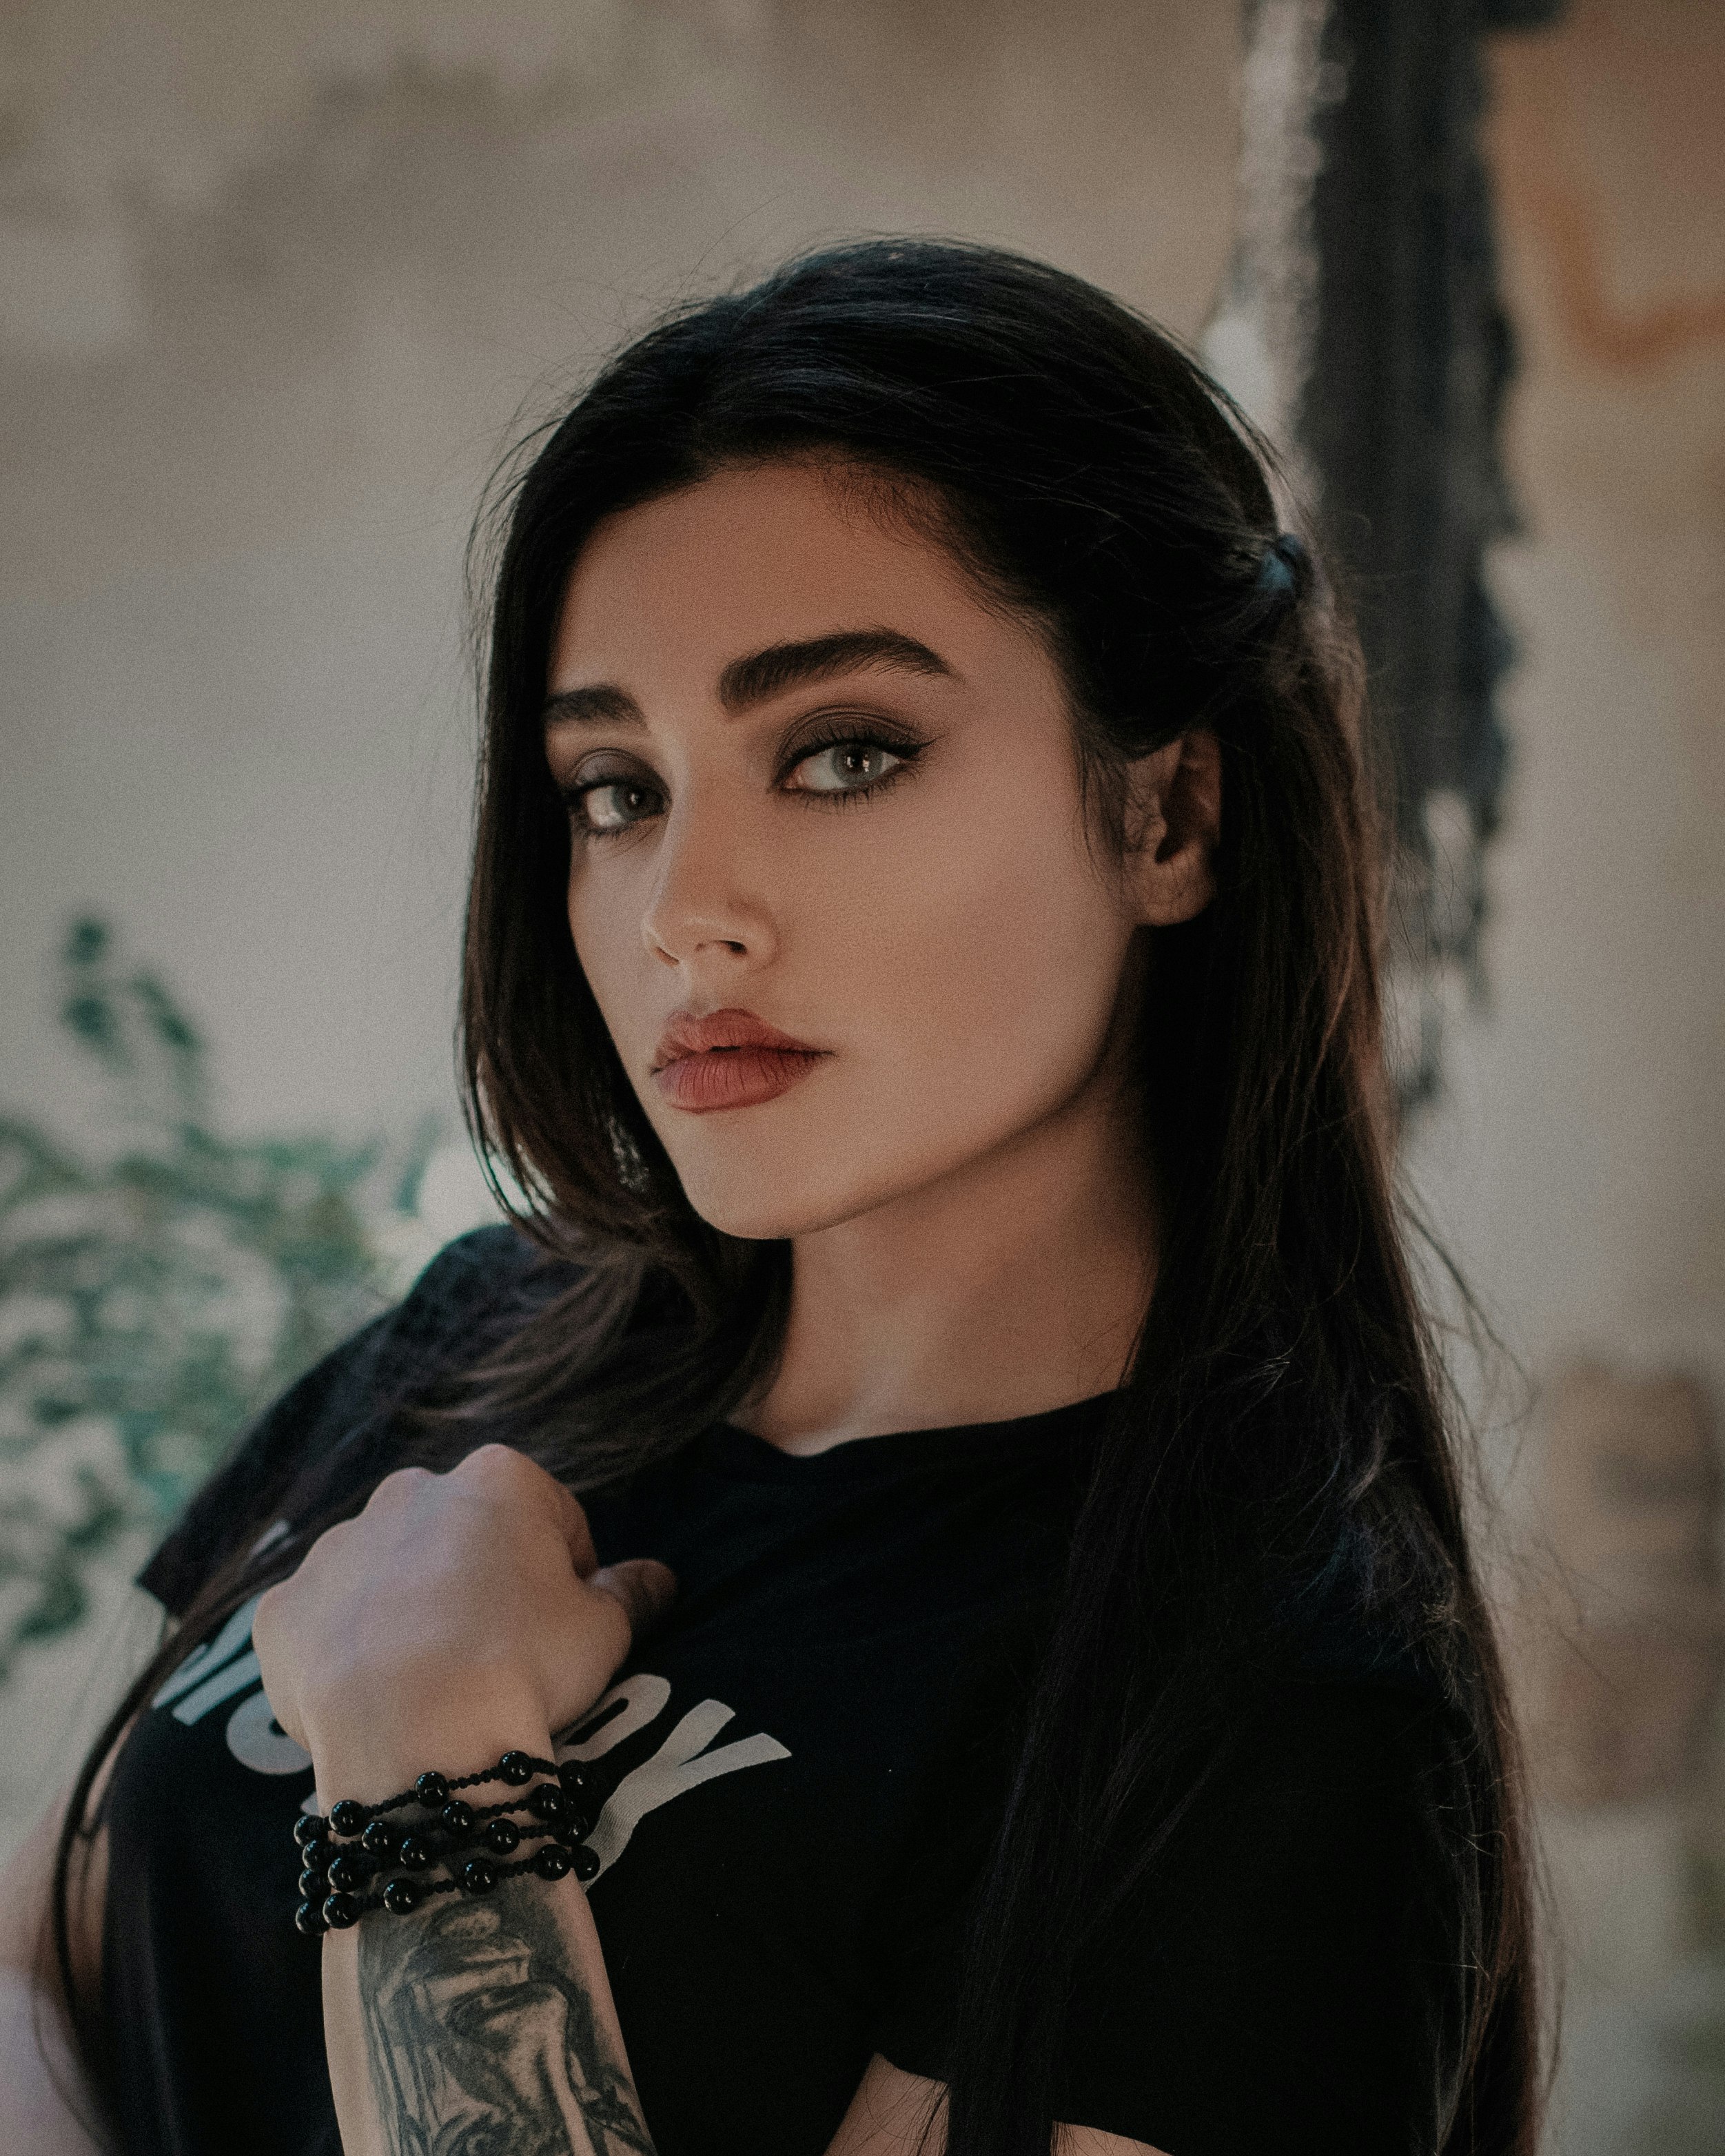 750+ Italian Girl Pictures | Download Free Images on Unsplash